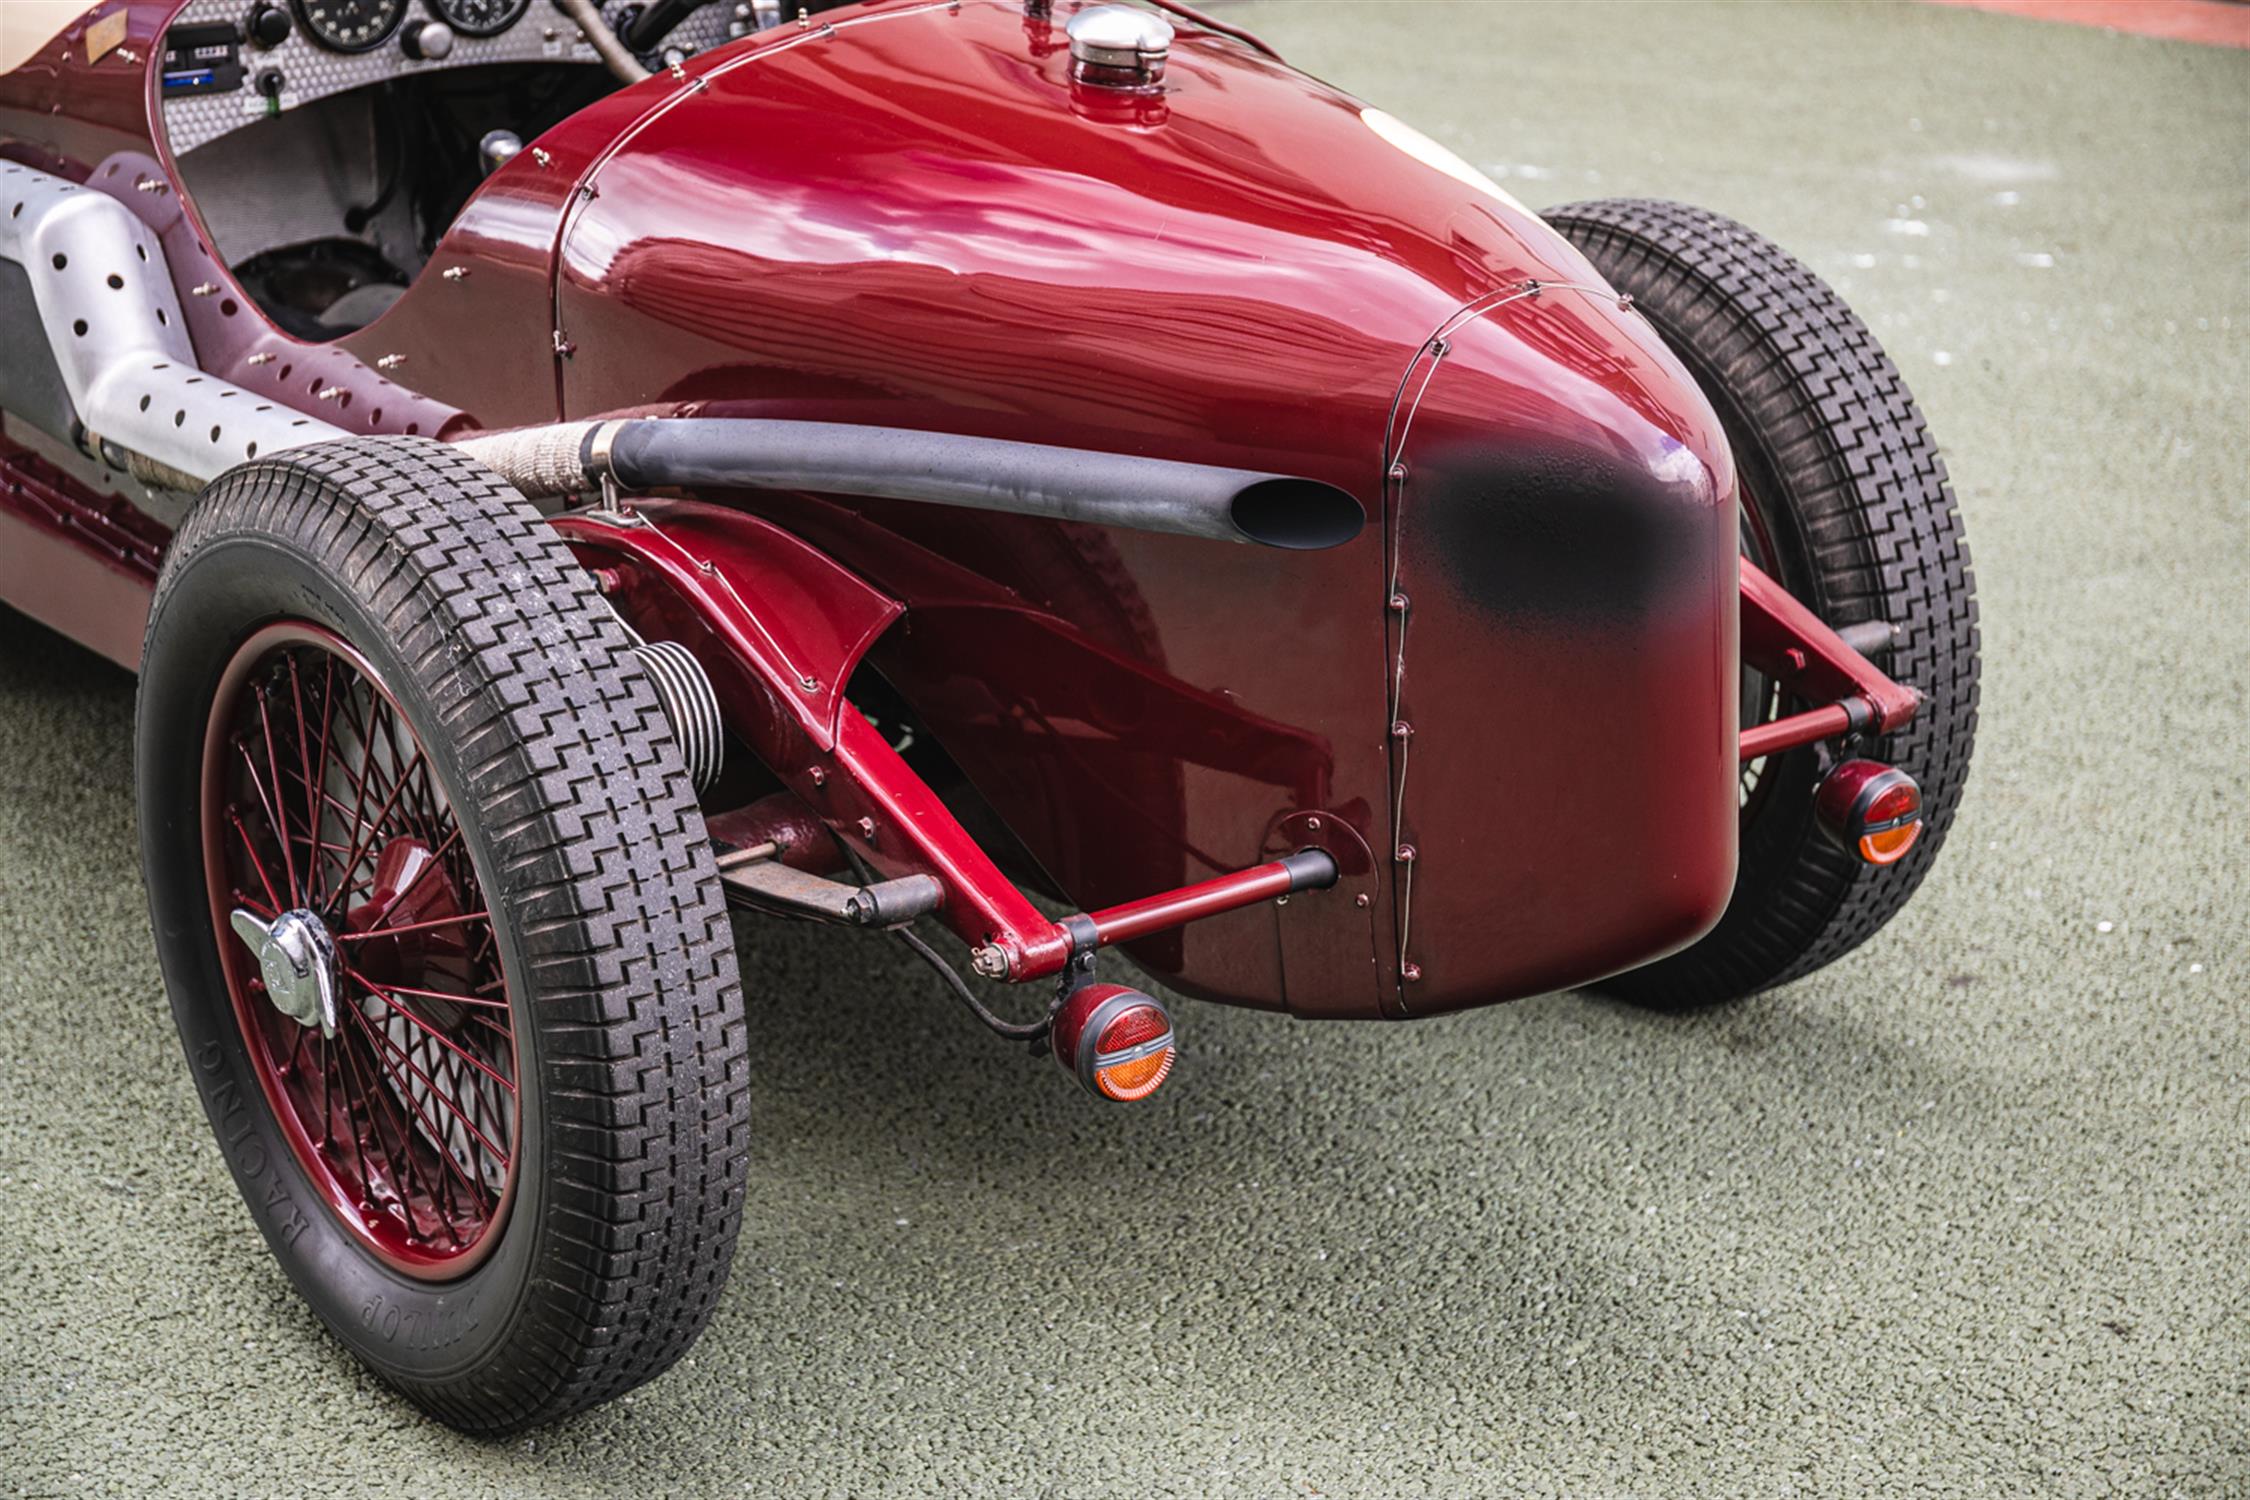 1937 Riley Monza Special 2.5 Litre (FIVA) - The Dart - Image 8 of 10